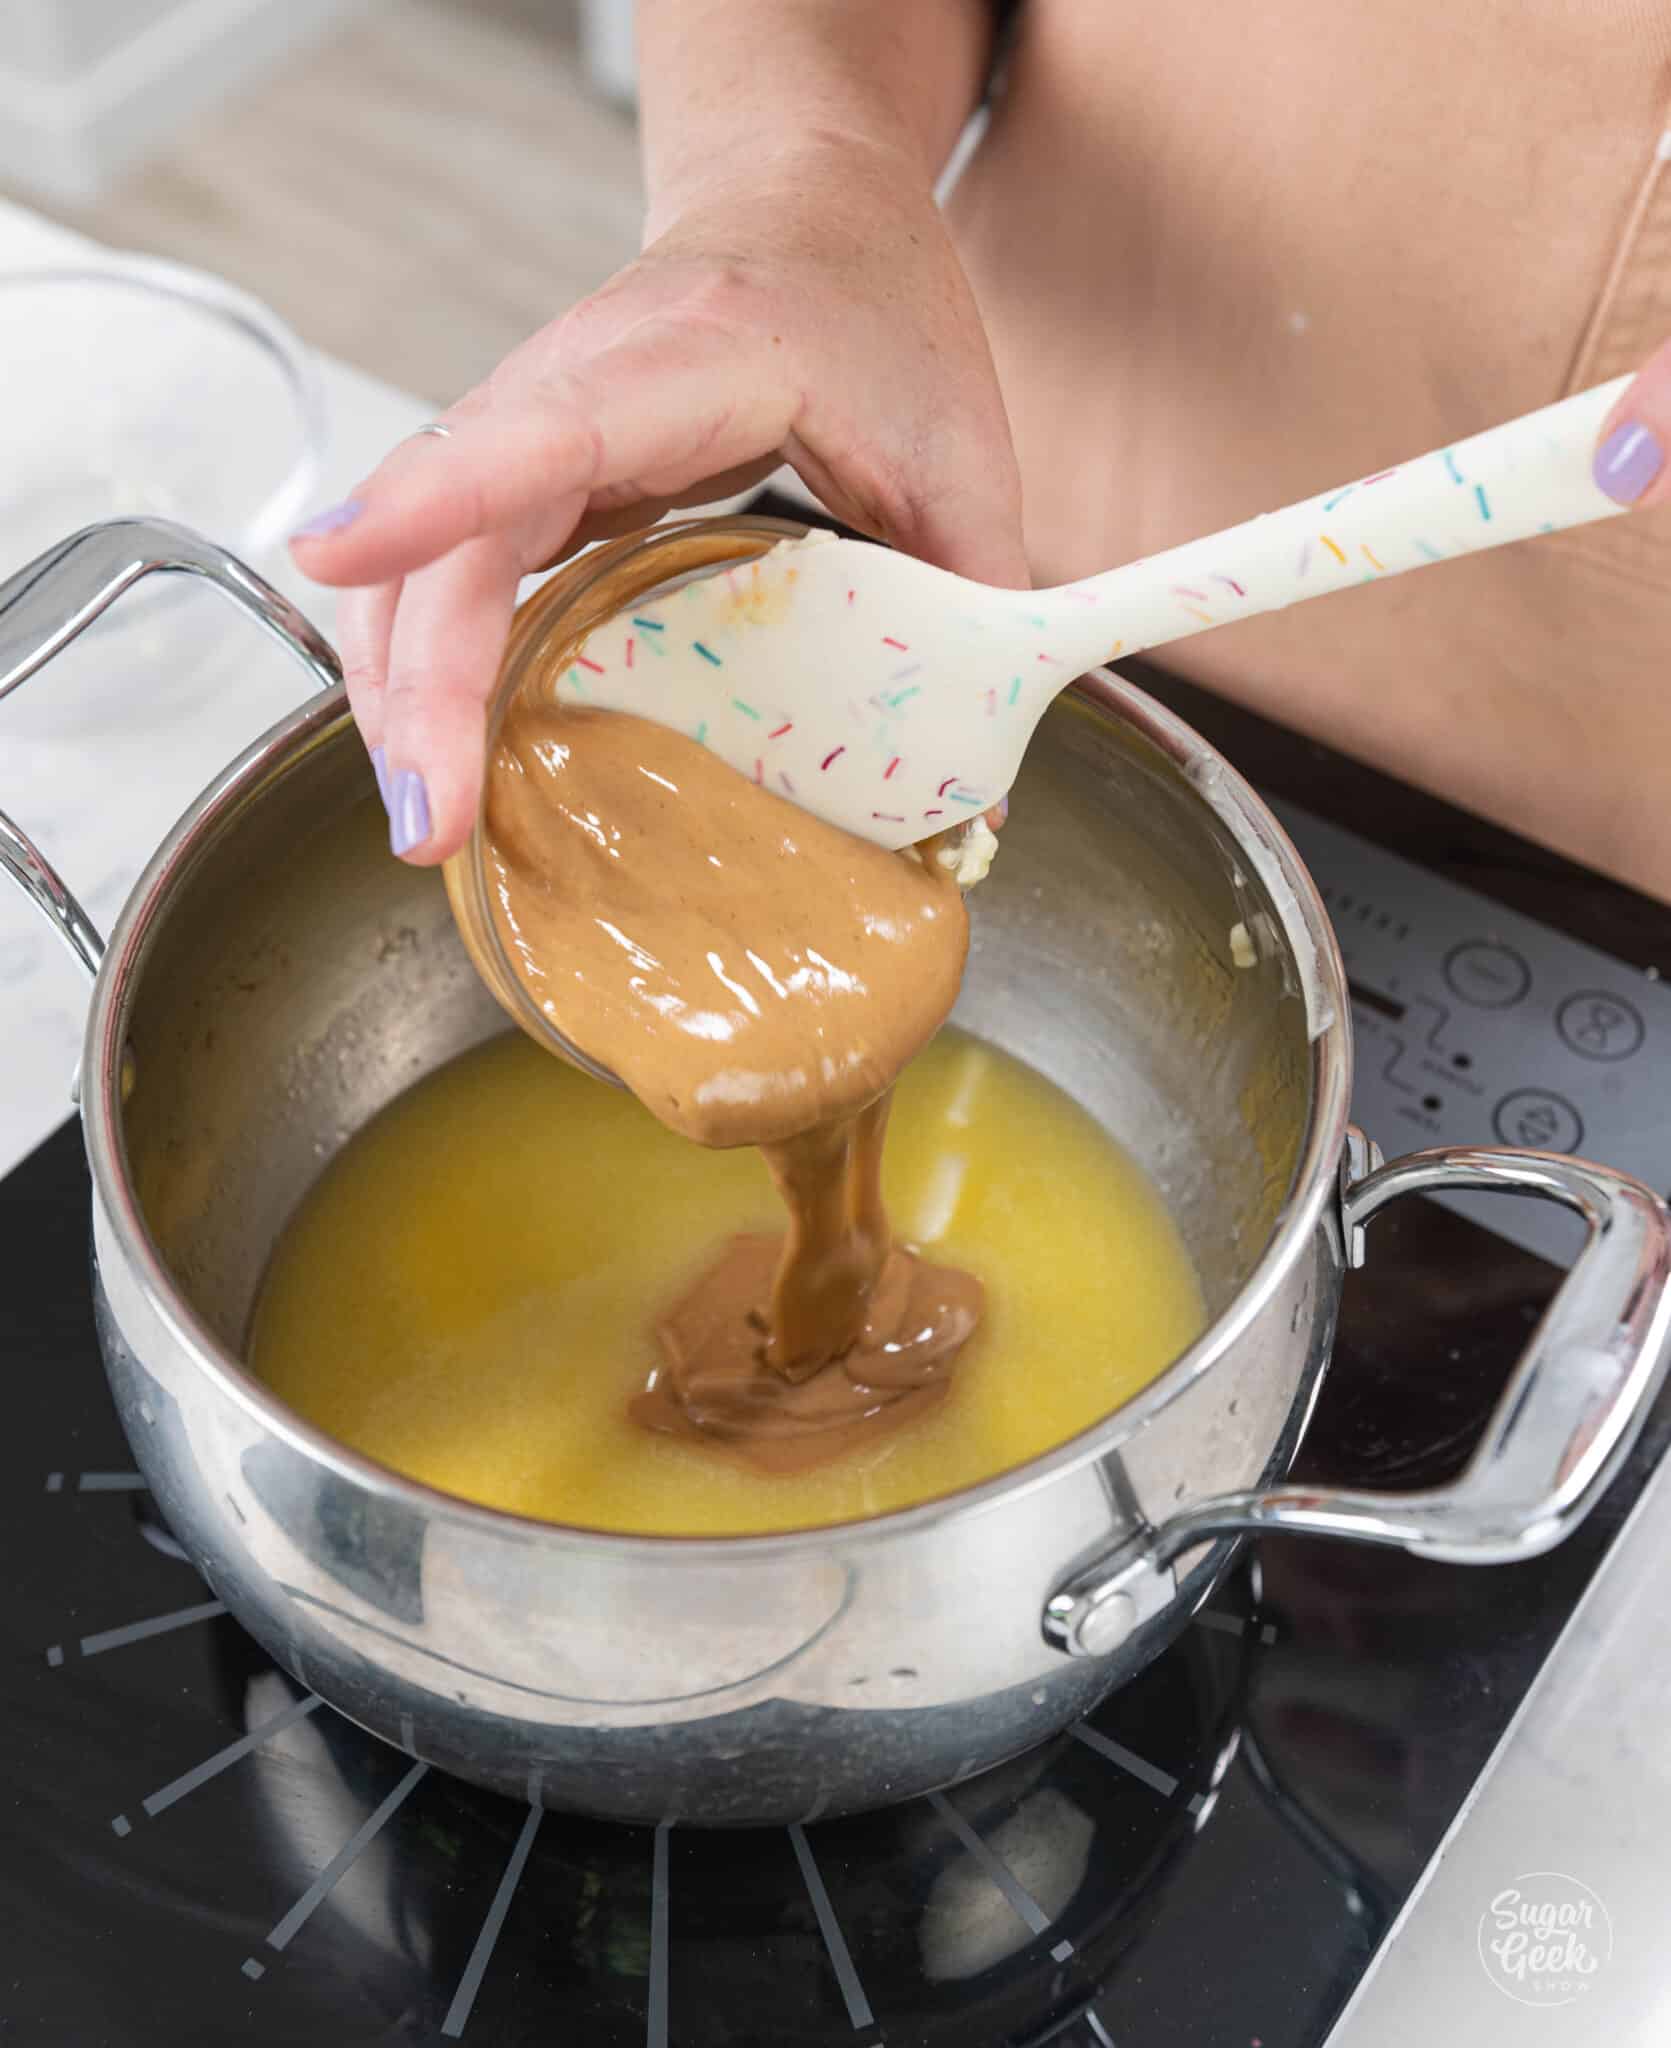 hand using spatula to scoop peanut butter into stove top.